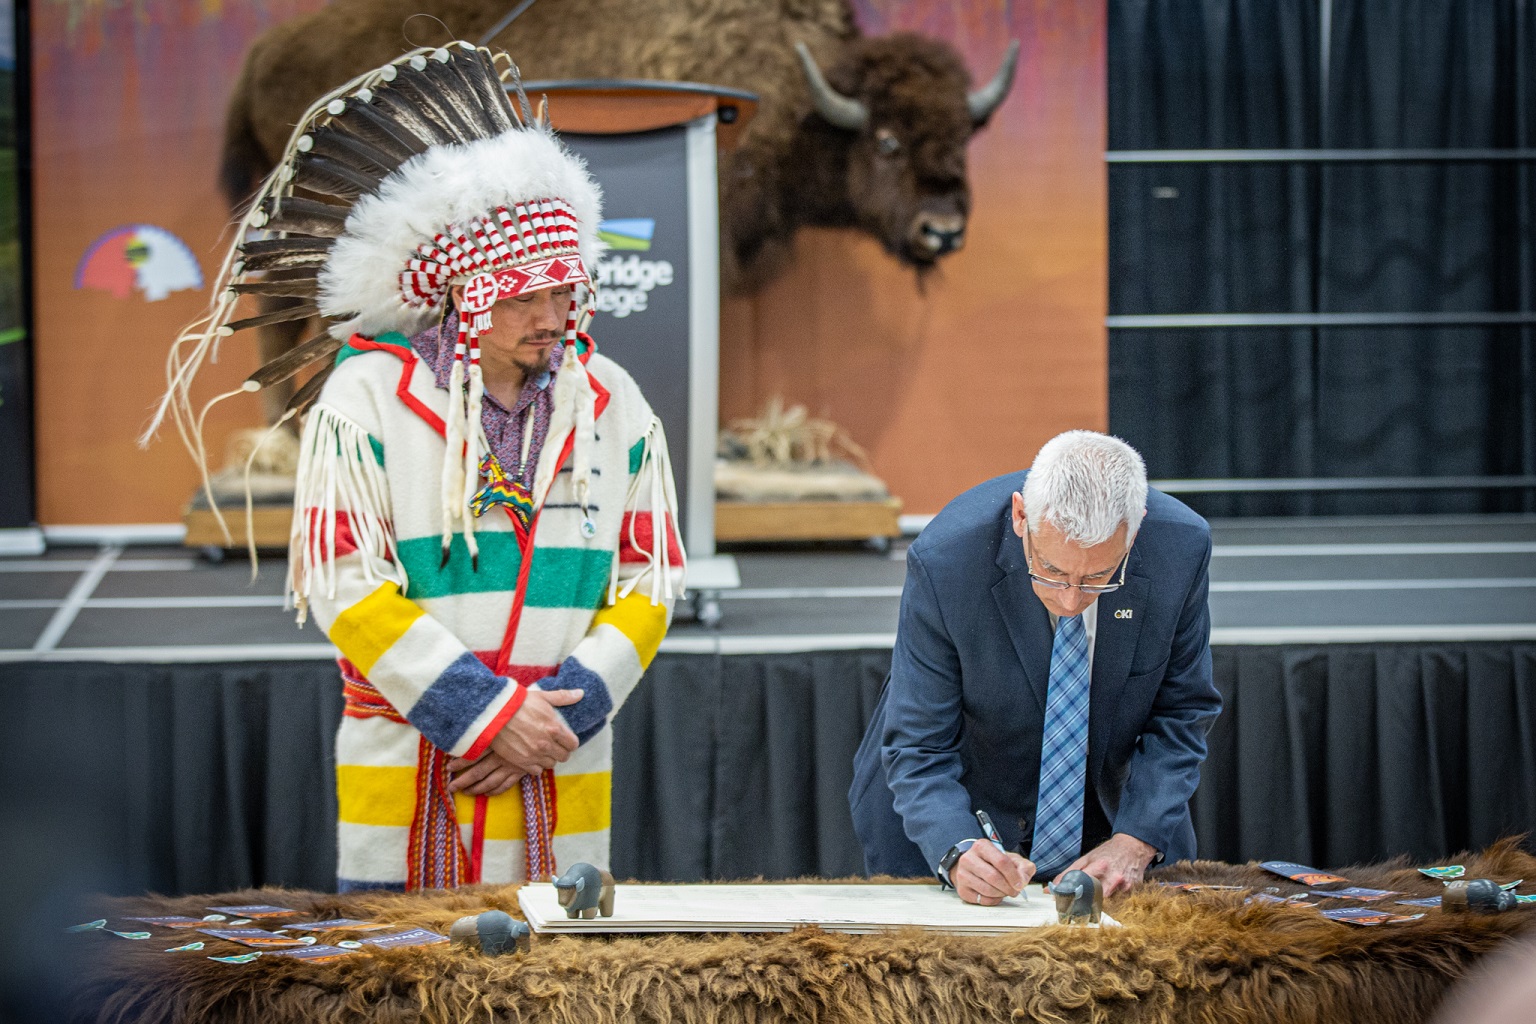 a man wearing a suit signs a pape while a man wearing traditional Indigenous clothing looks on